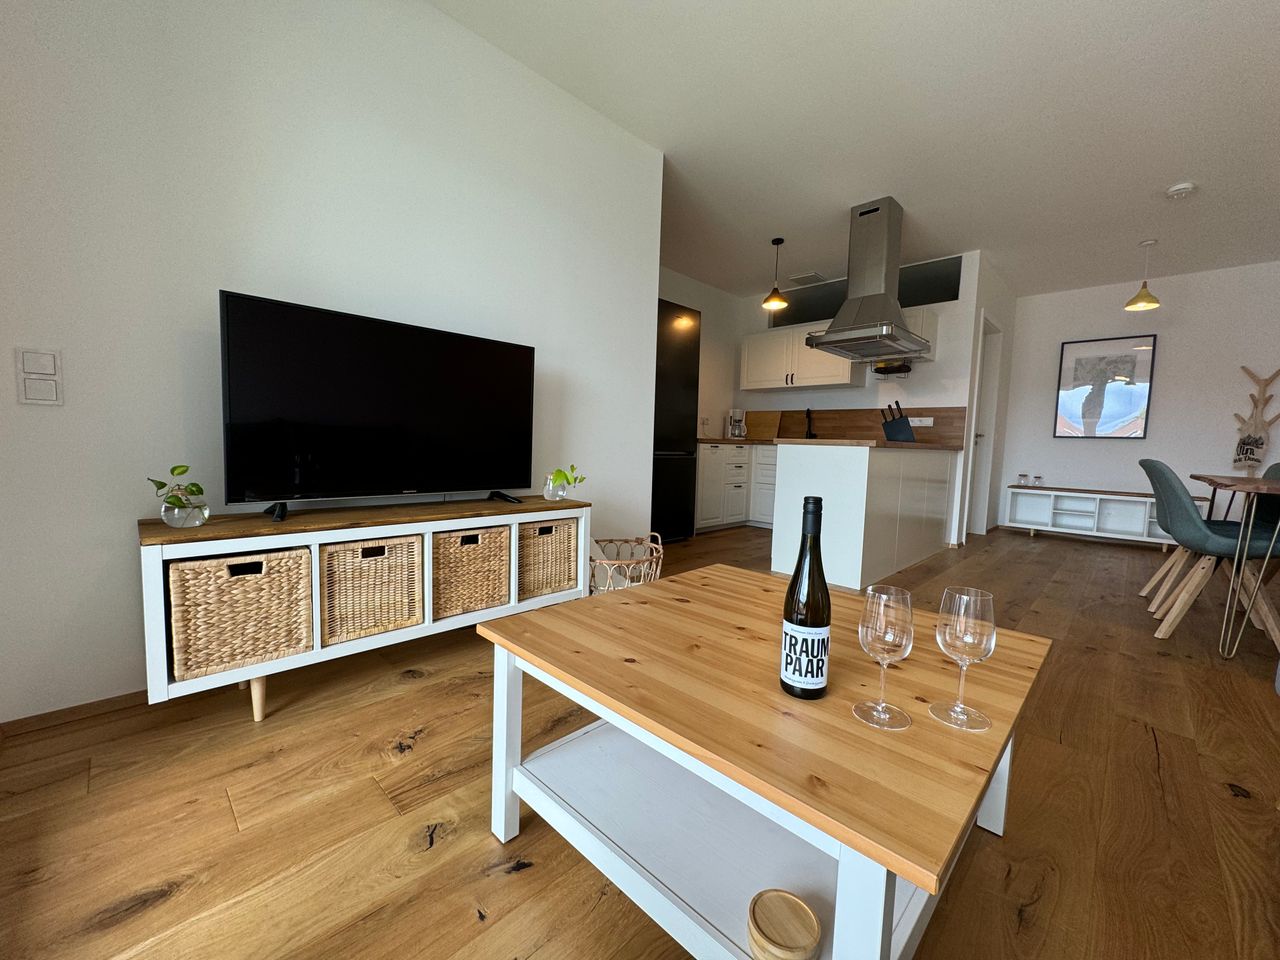 Exclusive, centrally located apartment in Ulm with excellent transport connections